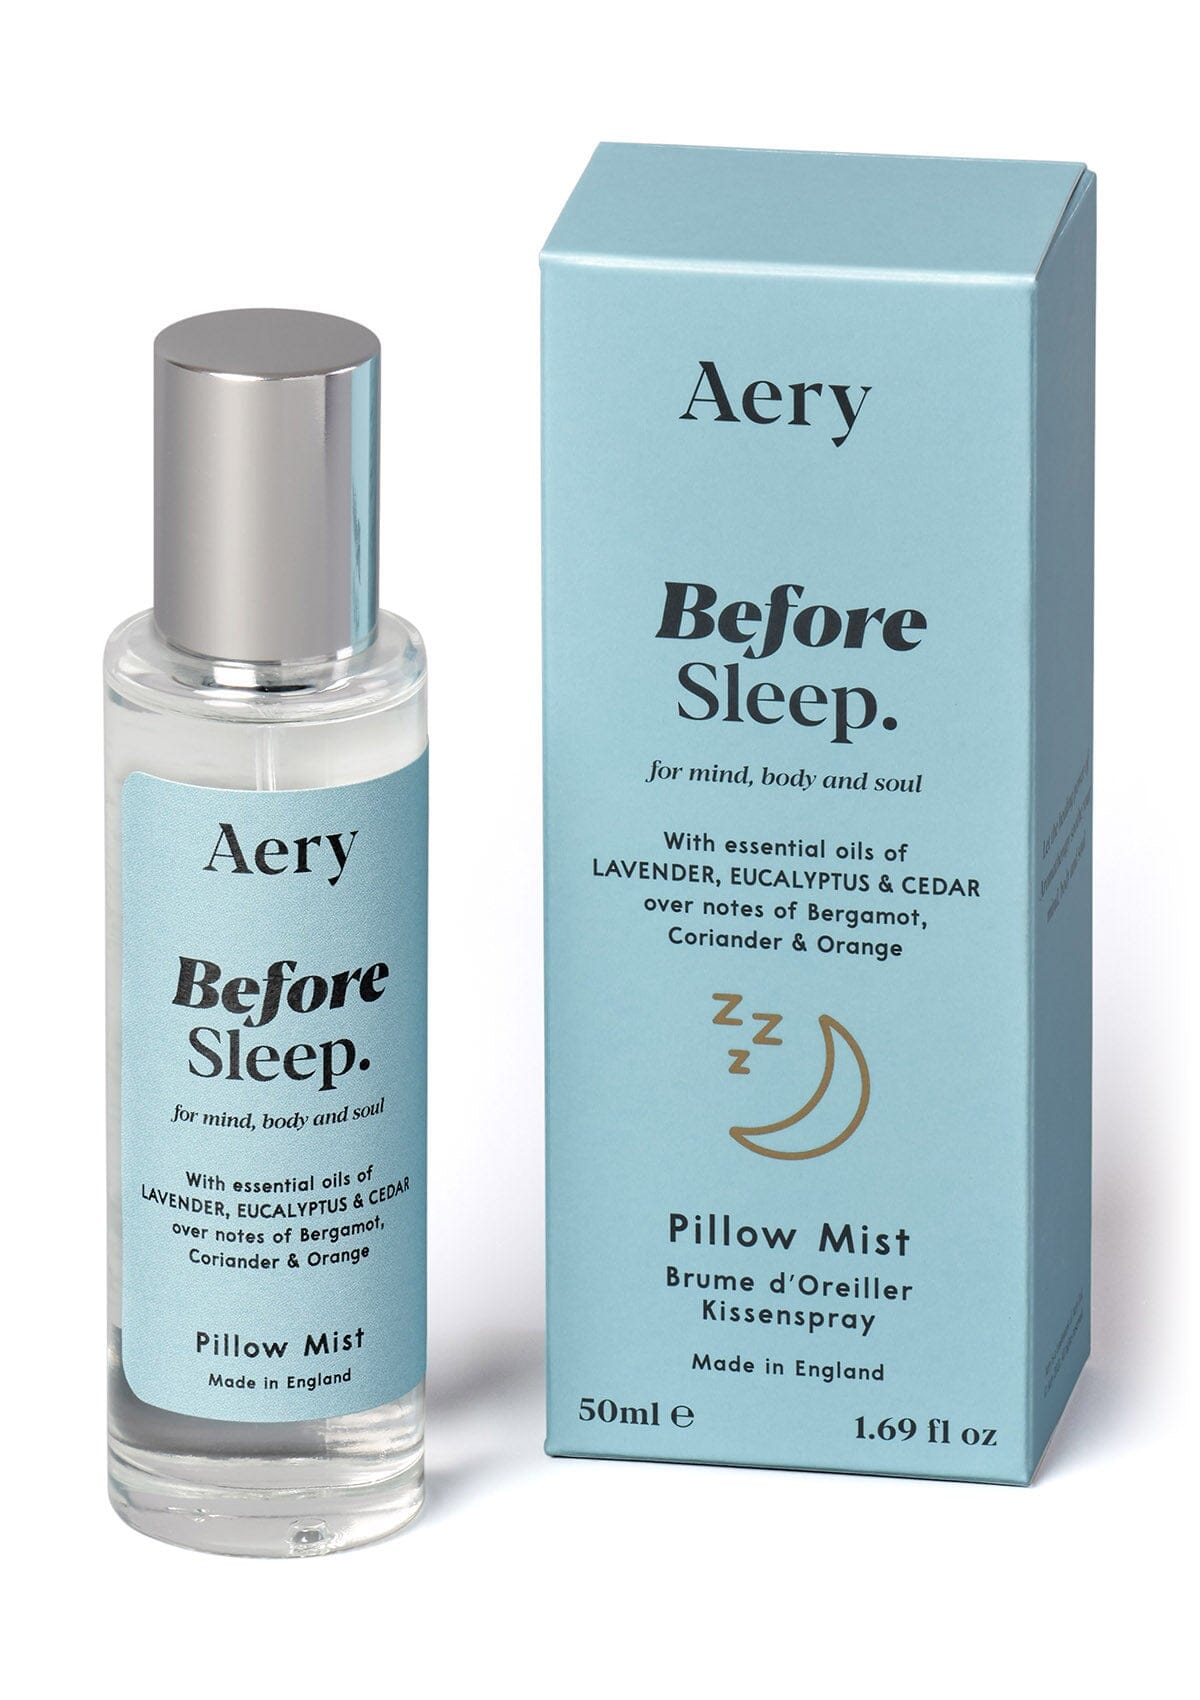 Blue Before Sleep pillow spray displayed next to product packaging by Aery on white background 